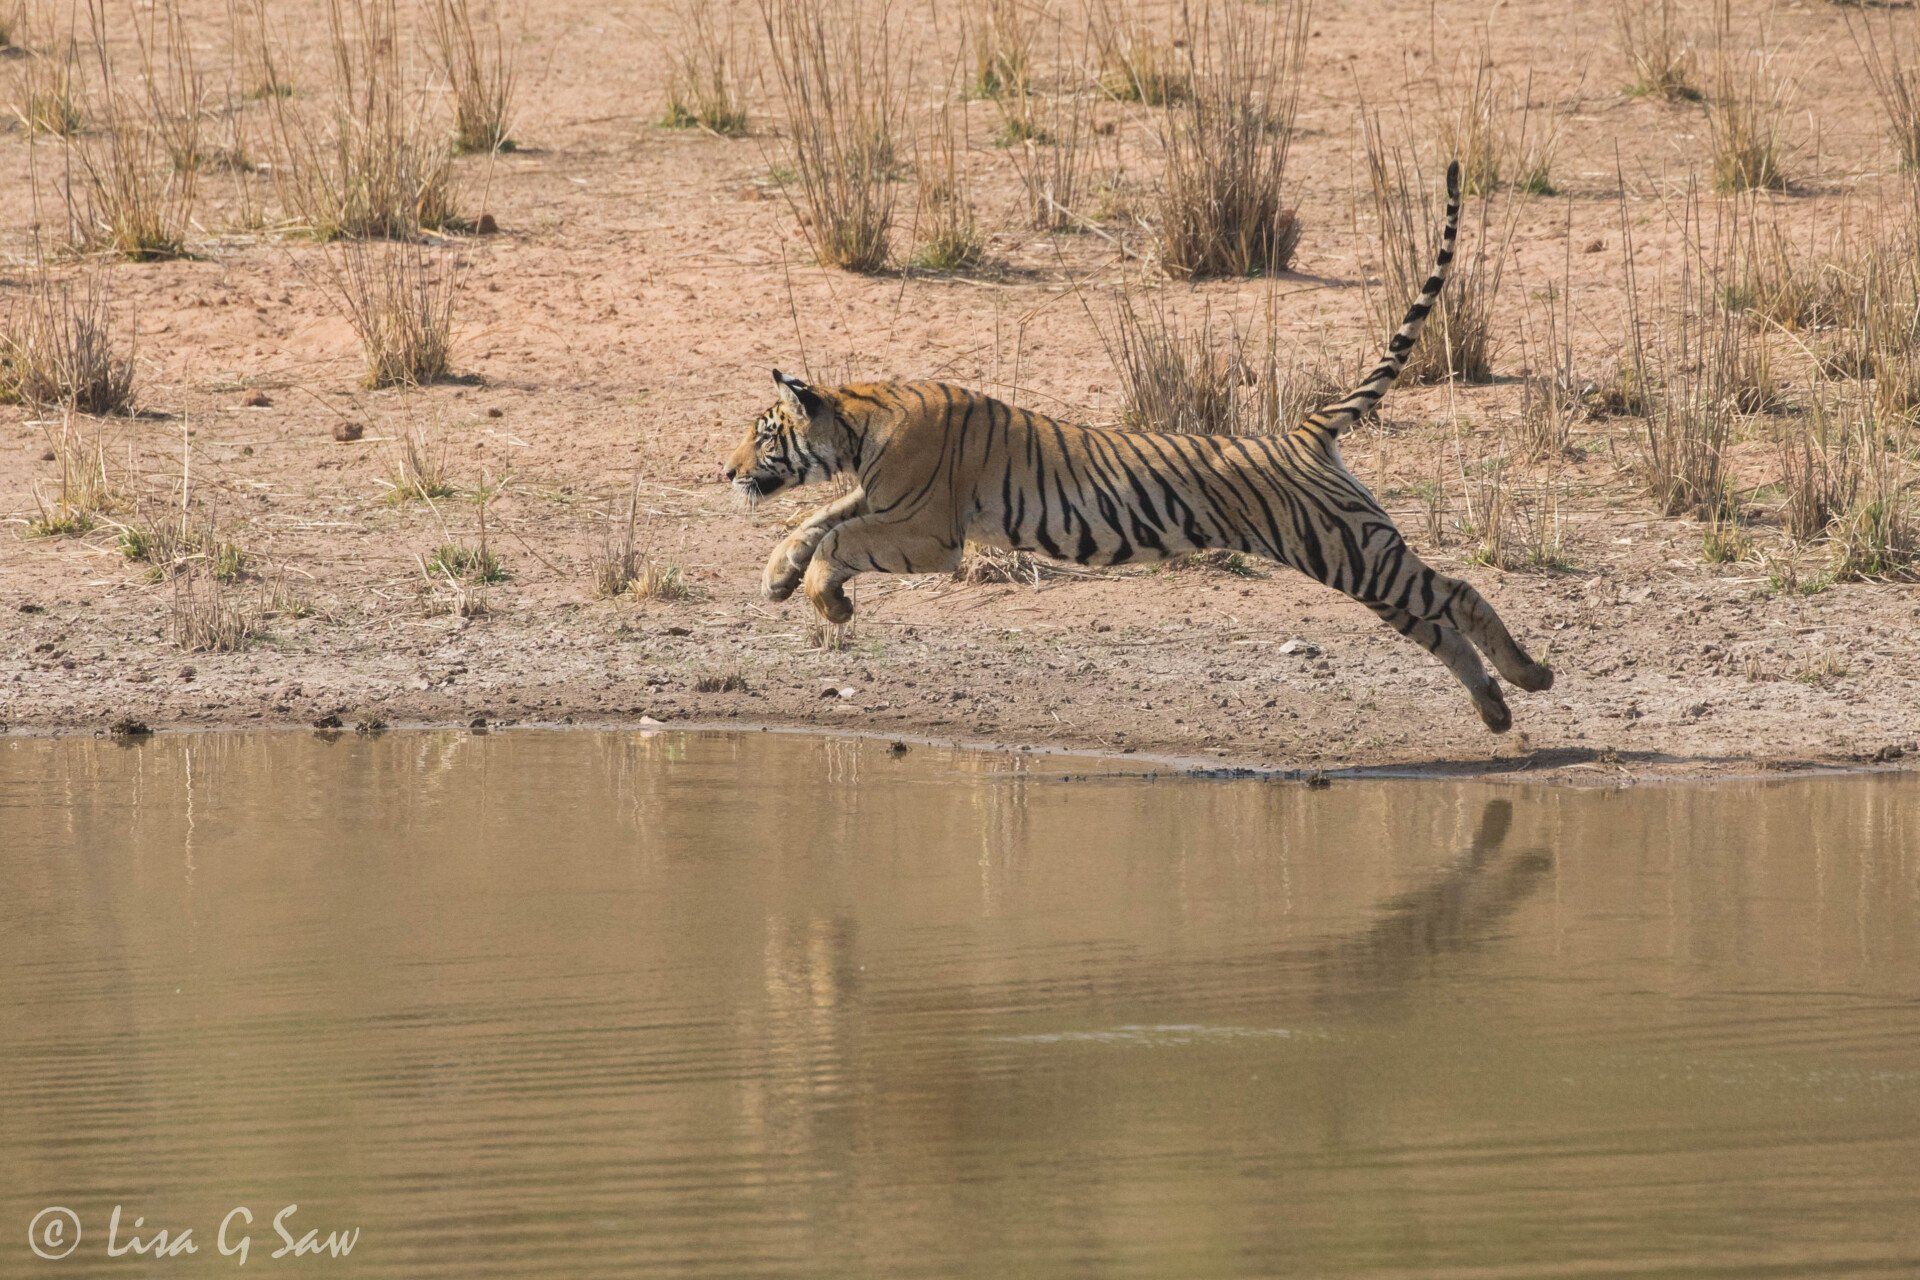 Young tiger leaping into water